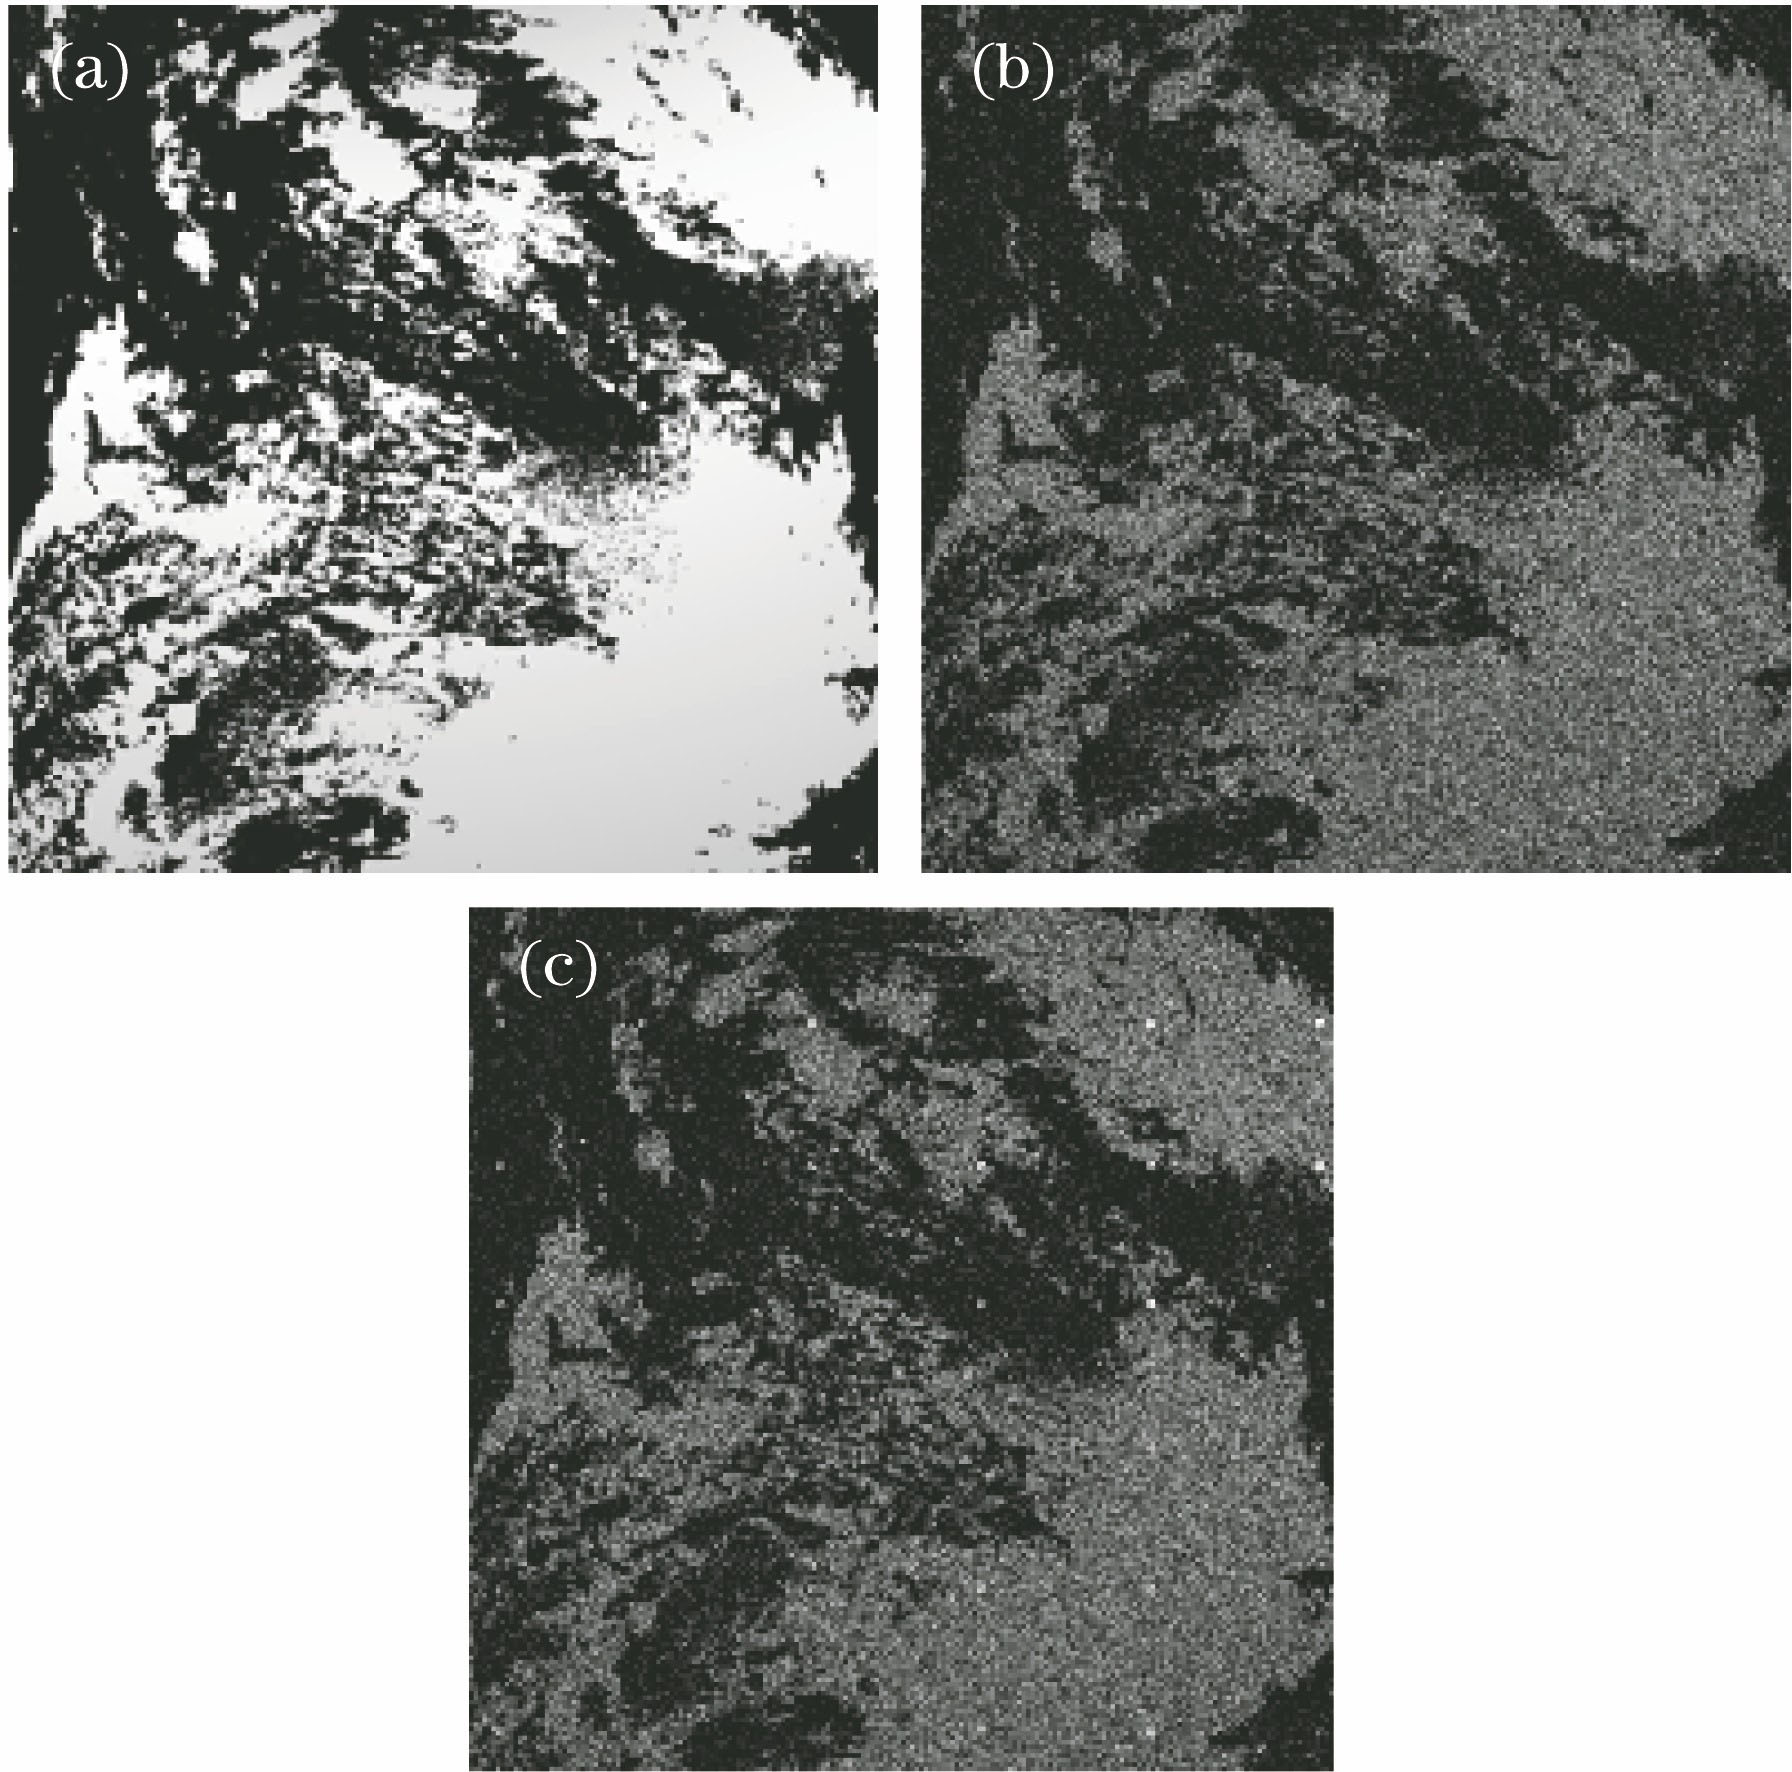 Synthetic infrared images. (a) Infrared background template; (b) synthetic infrared gray background image; (c) synthetic infrared gray image containing target